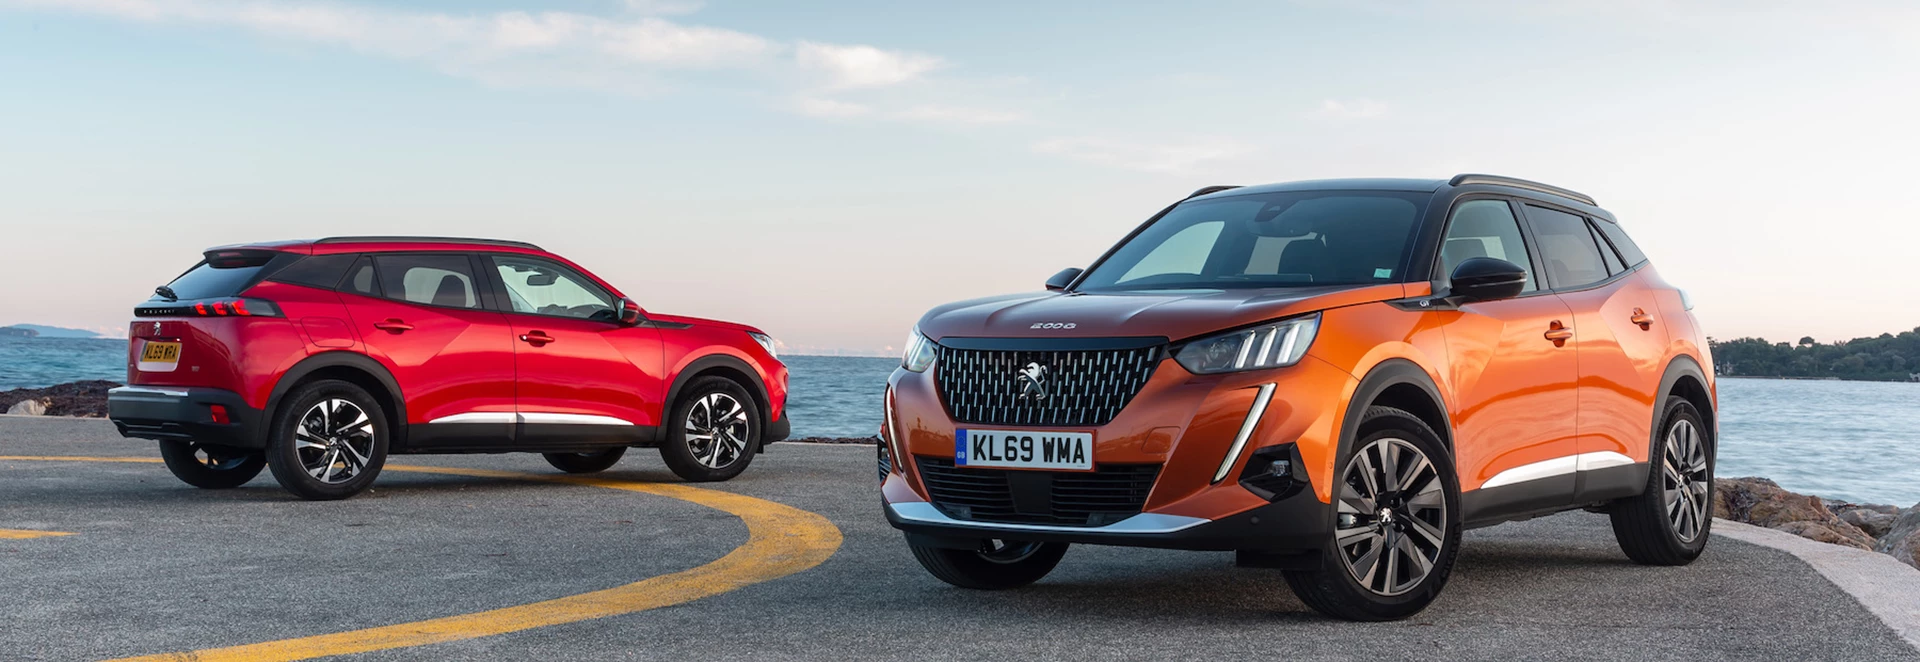 Prices and specs announced for new 2020 Peugeot 2008 and e-2008 crossovers